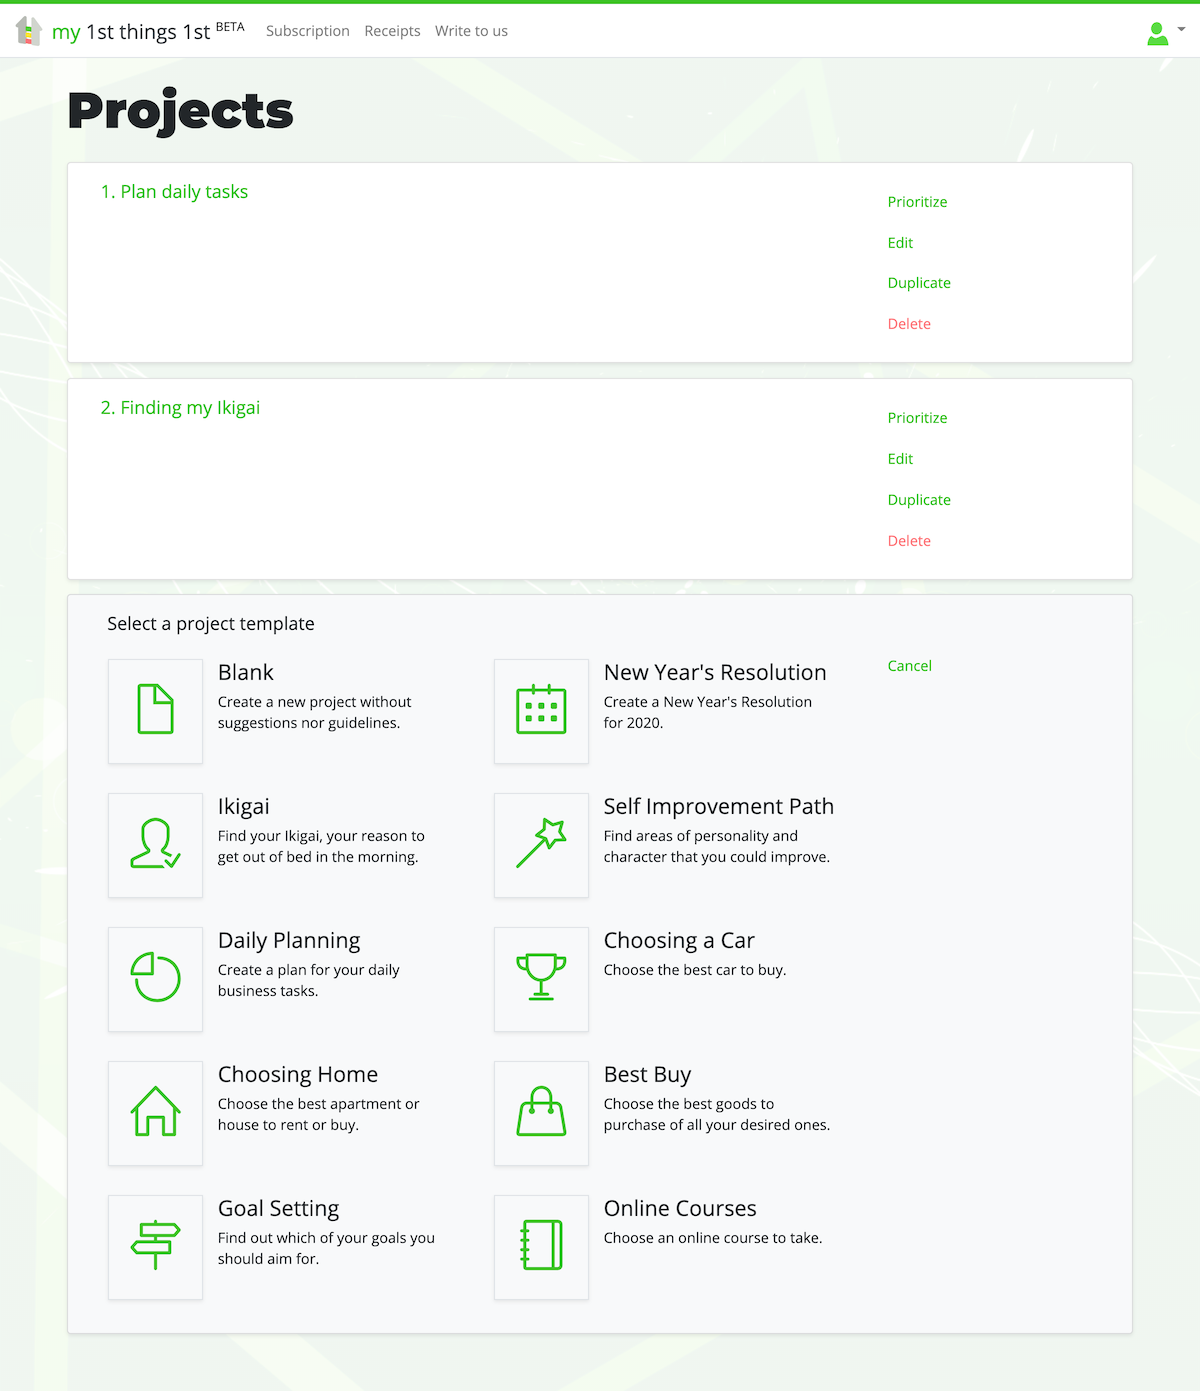 Choosing a project template